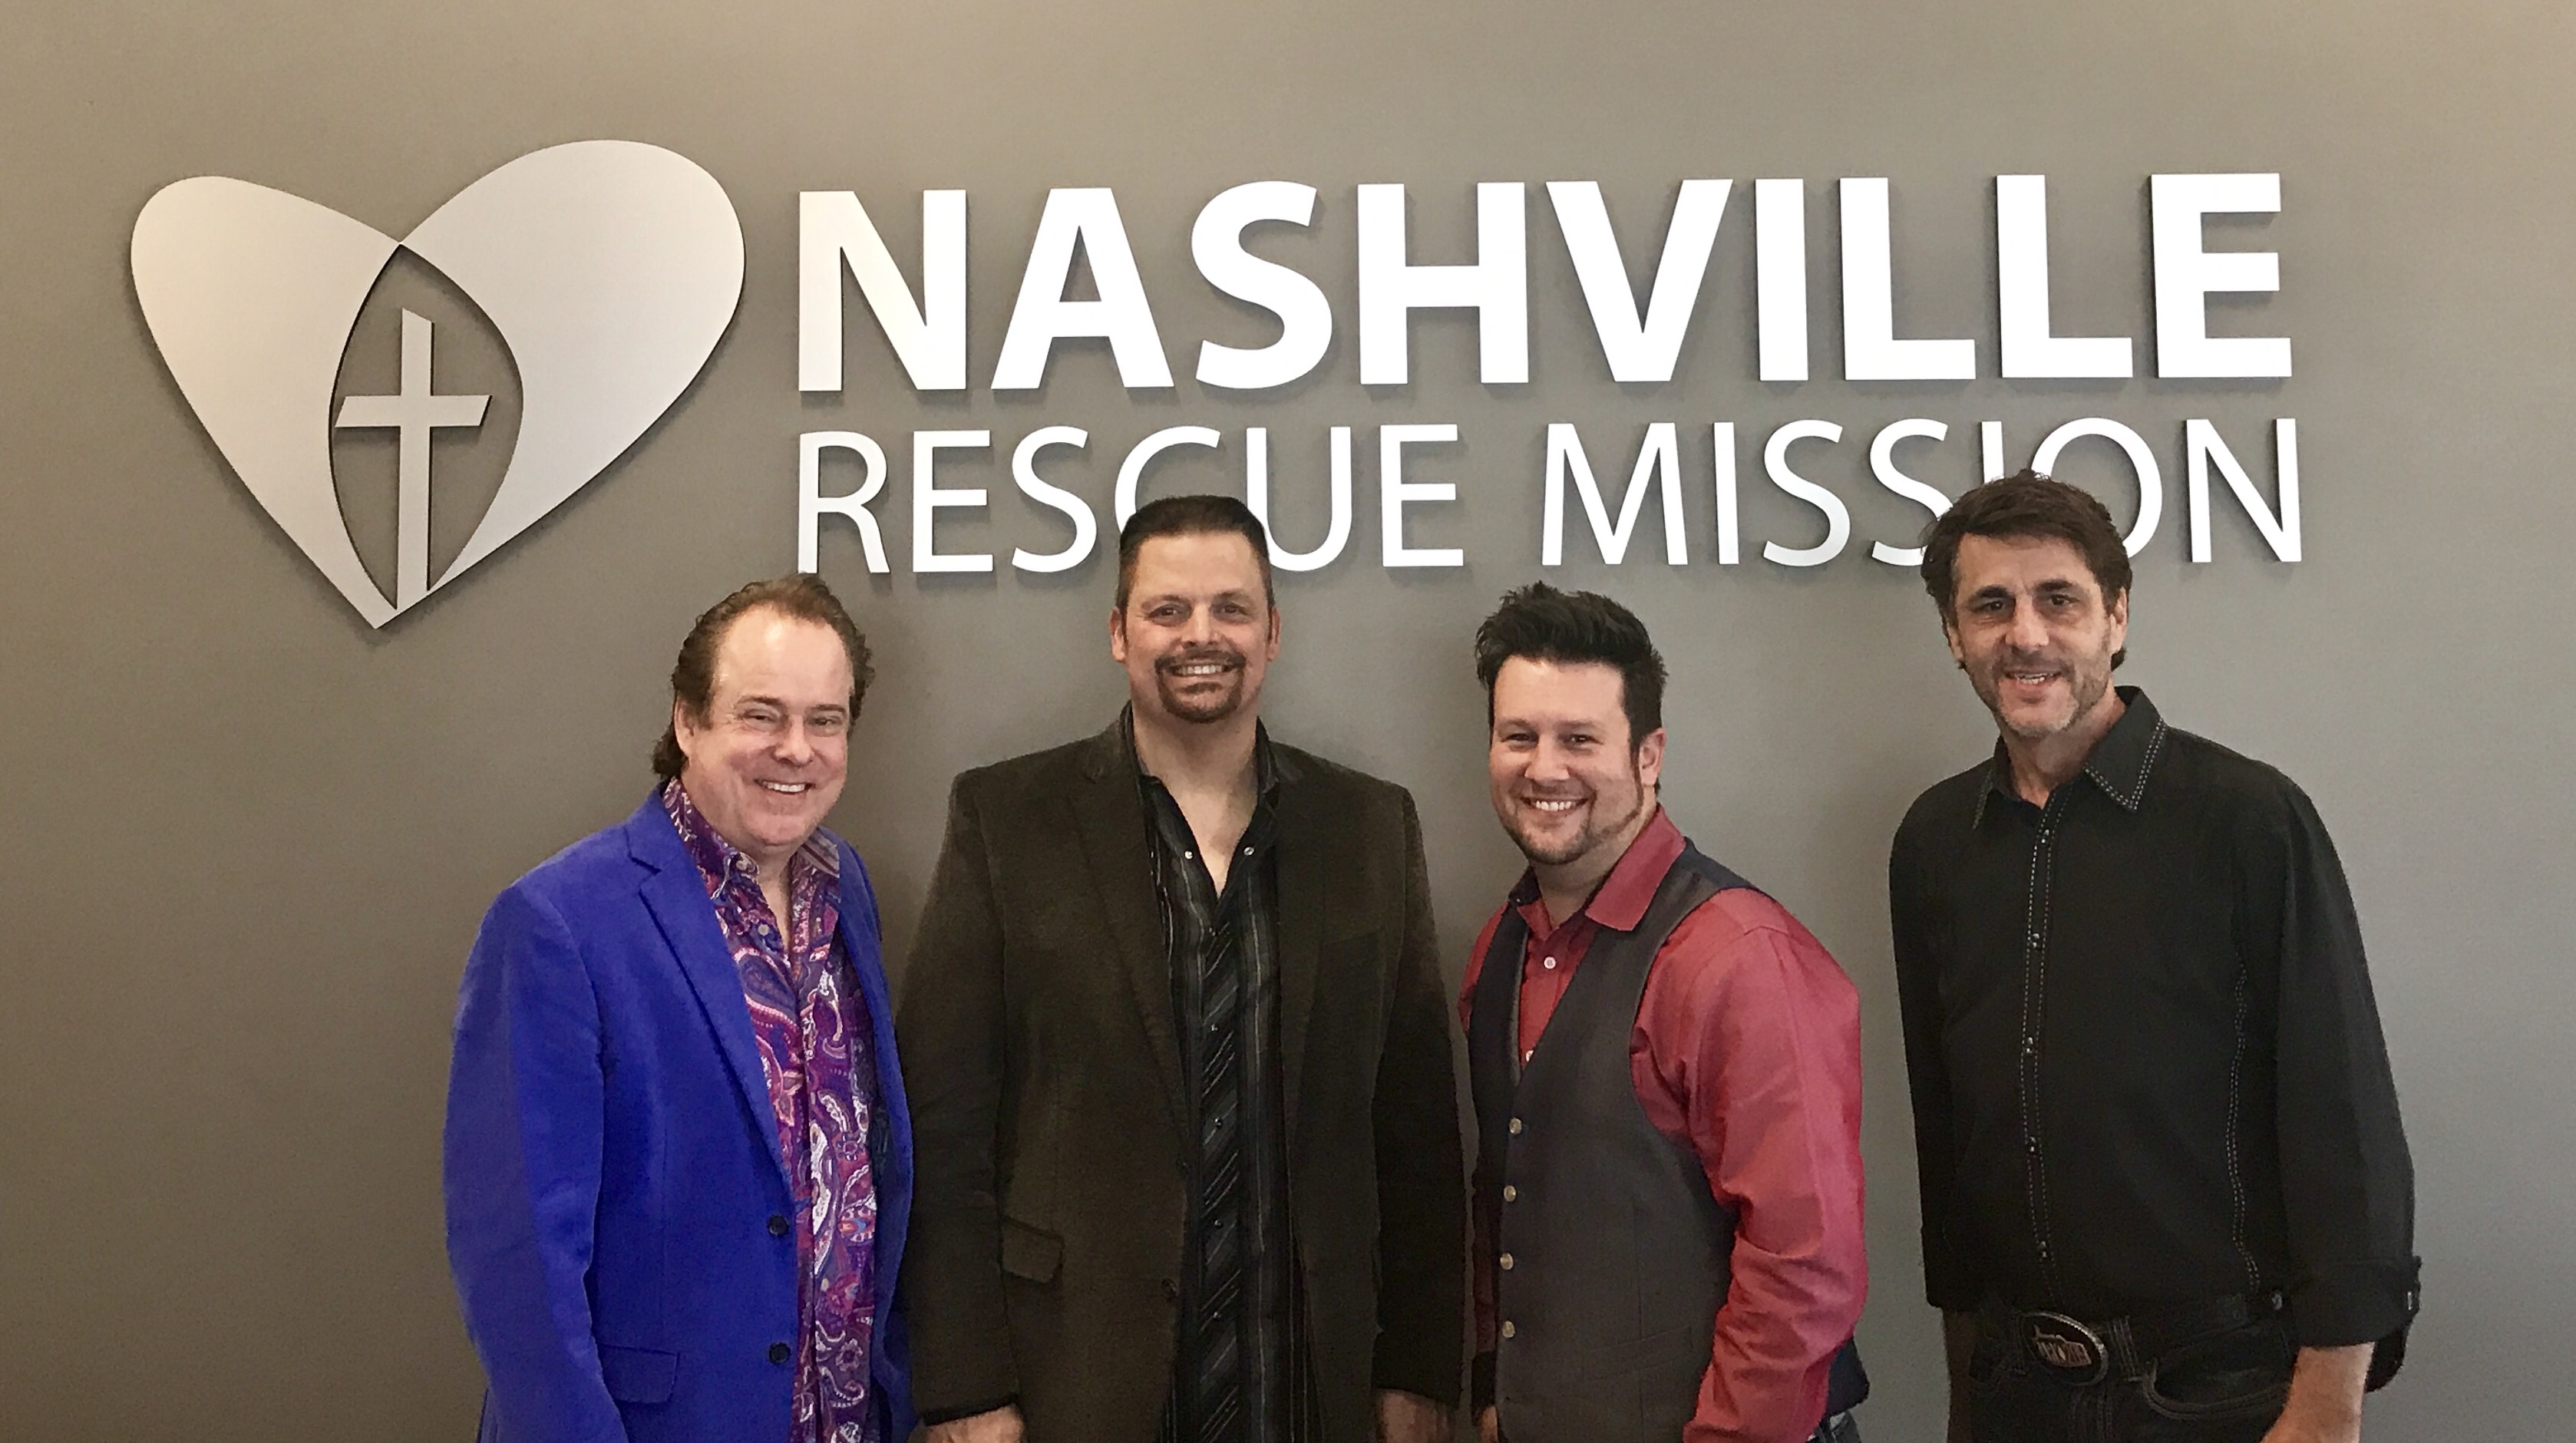 MARK209 SPECIAL GUEST FOR NASHVILLE RESCUE MISSIONâ€™S GOOD FRIDAY SERVICE